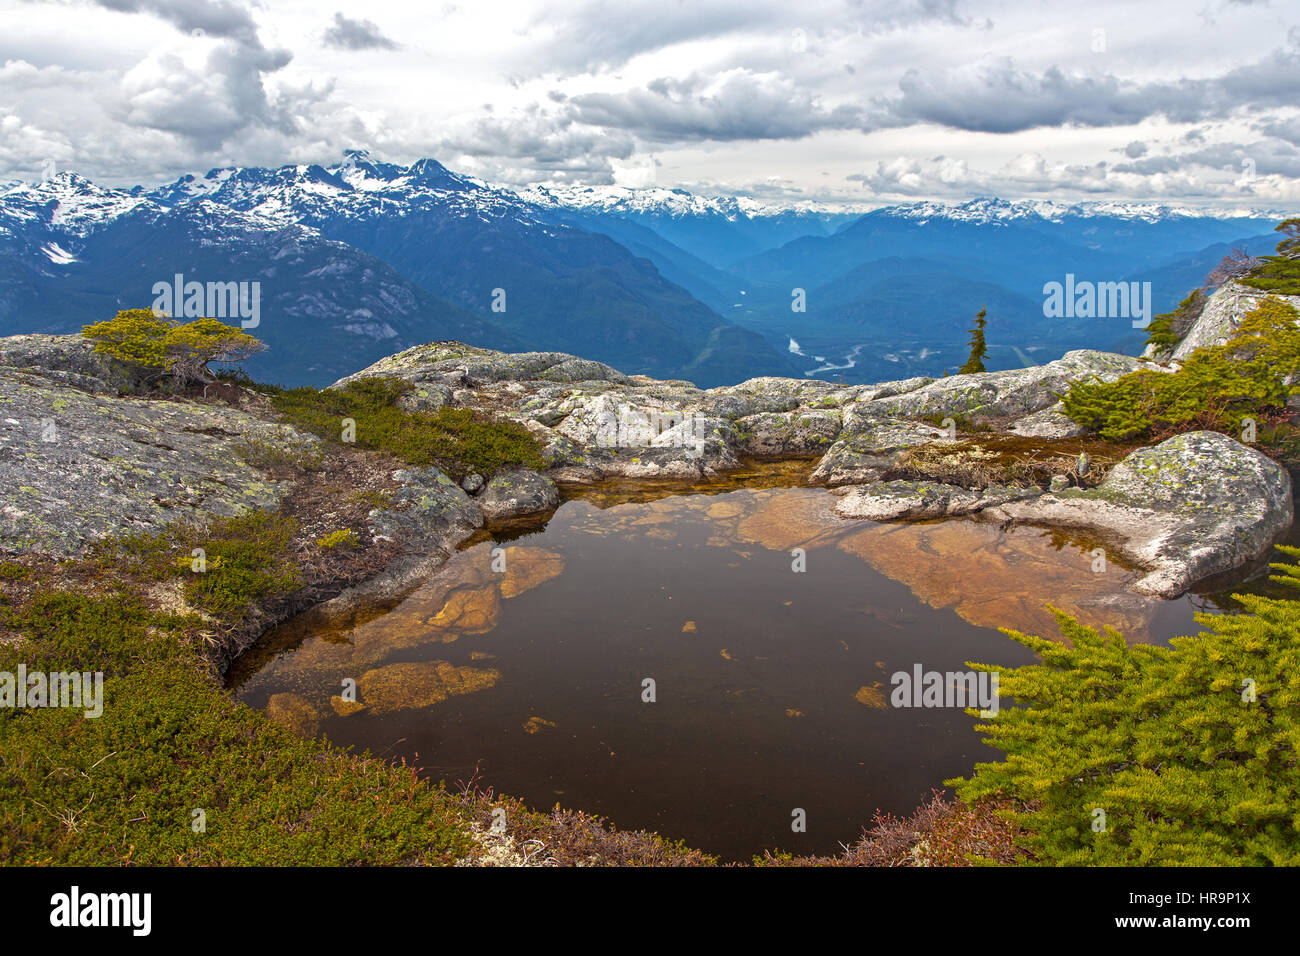 Small alpine lake in rock fissure with distant snowy Tantalus mountains and dramatic cloudy sky near Squamish Coast Mountains British Columbia Canada Stock Photo